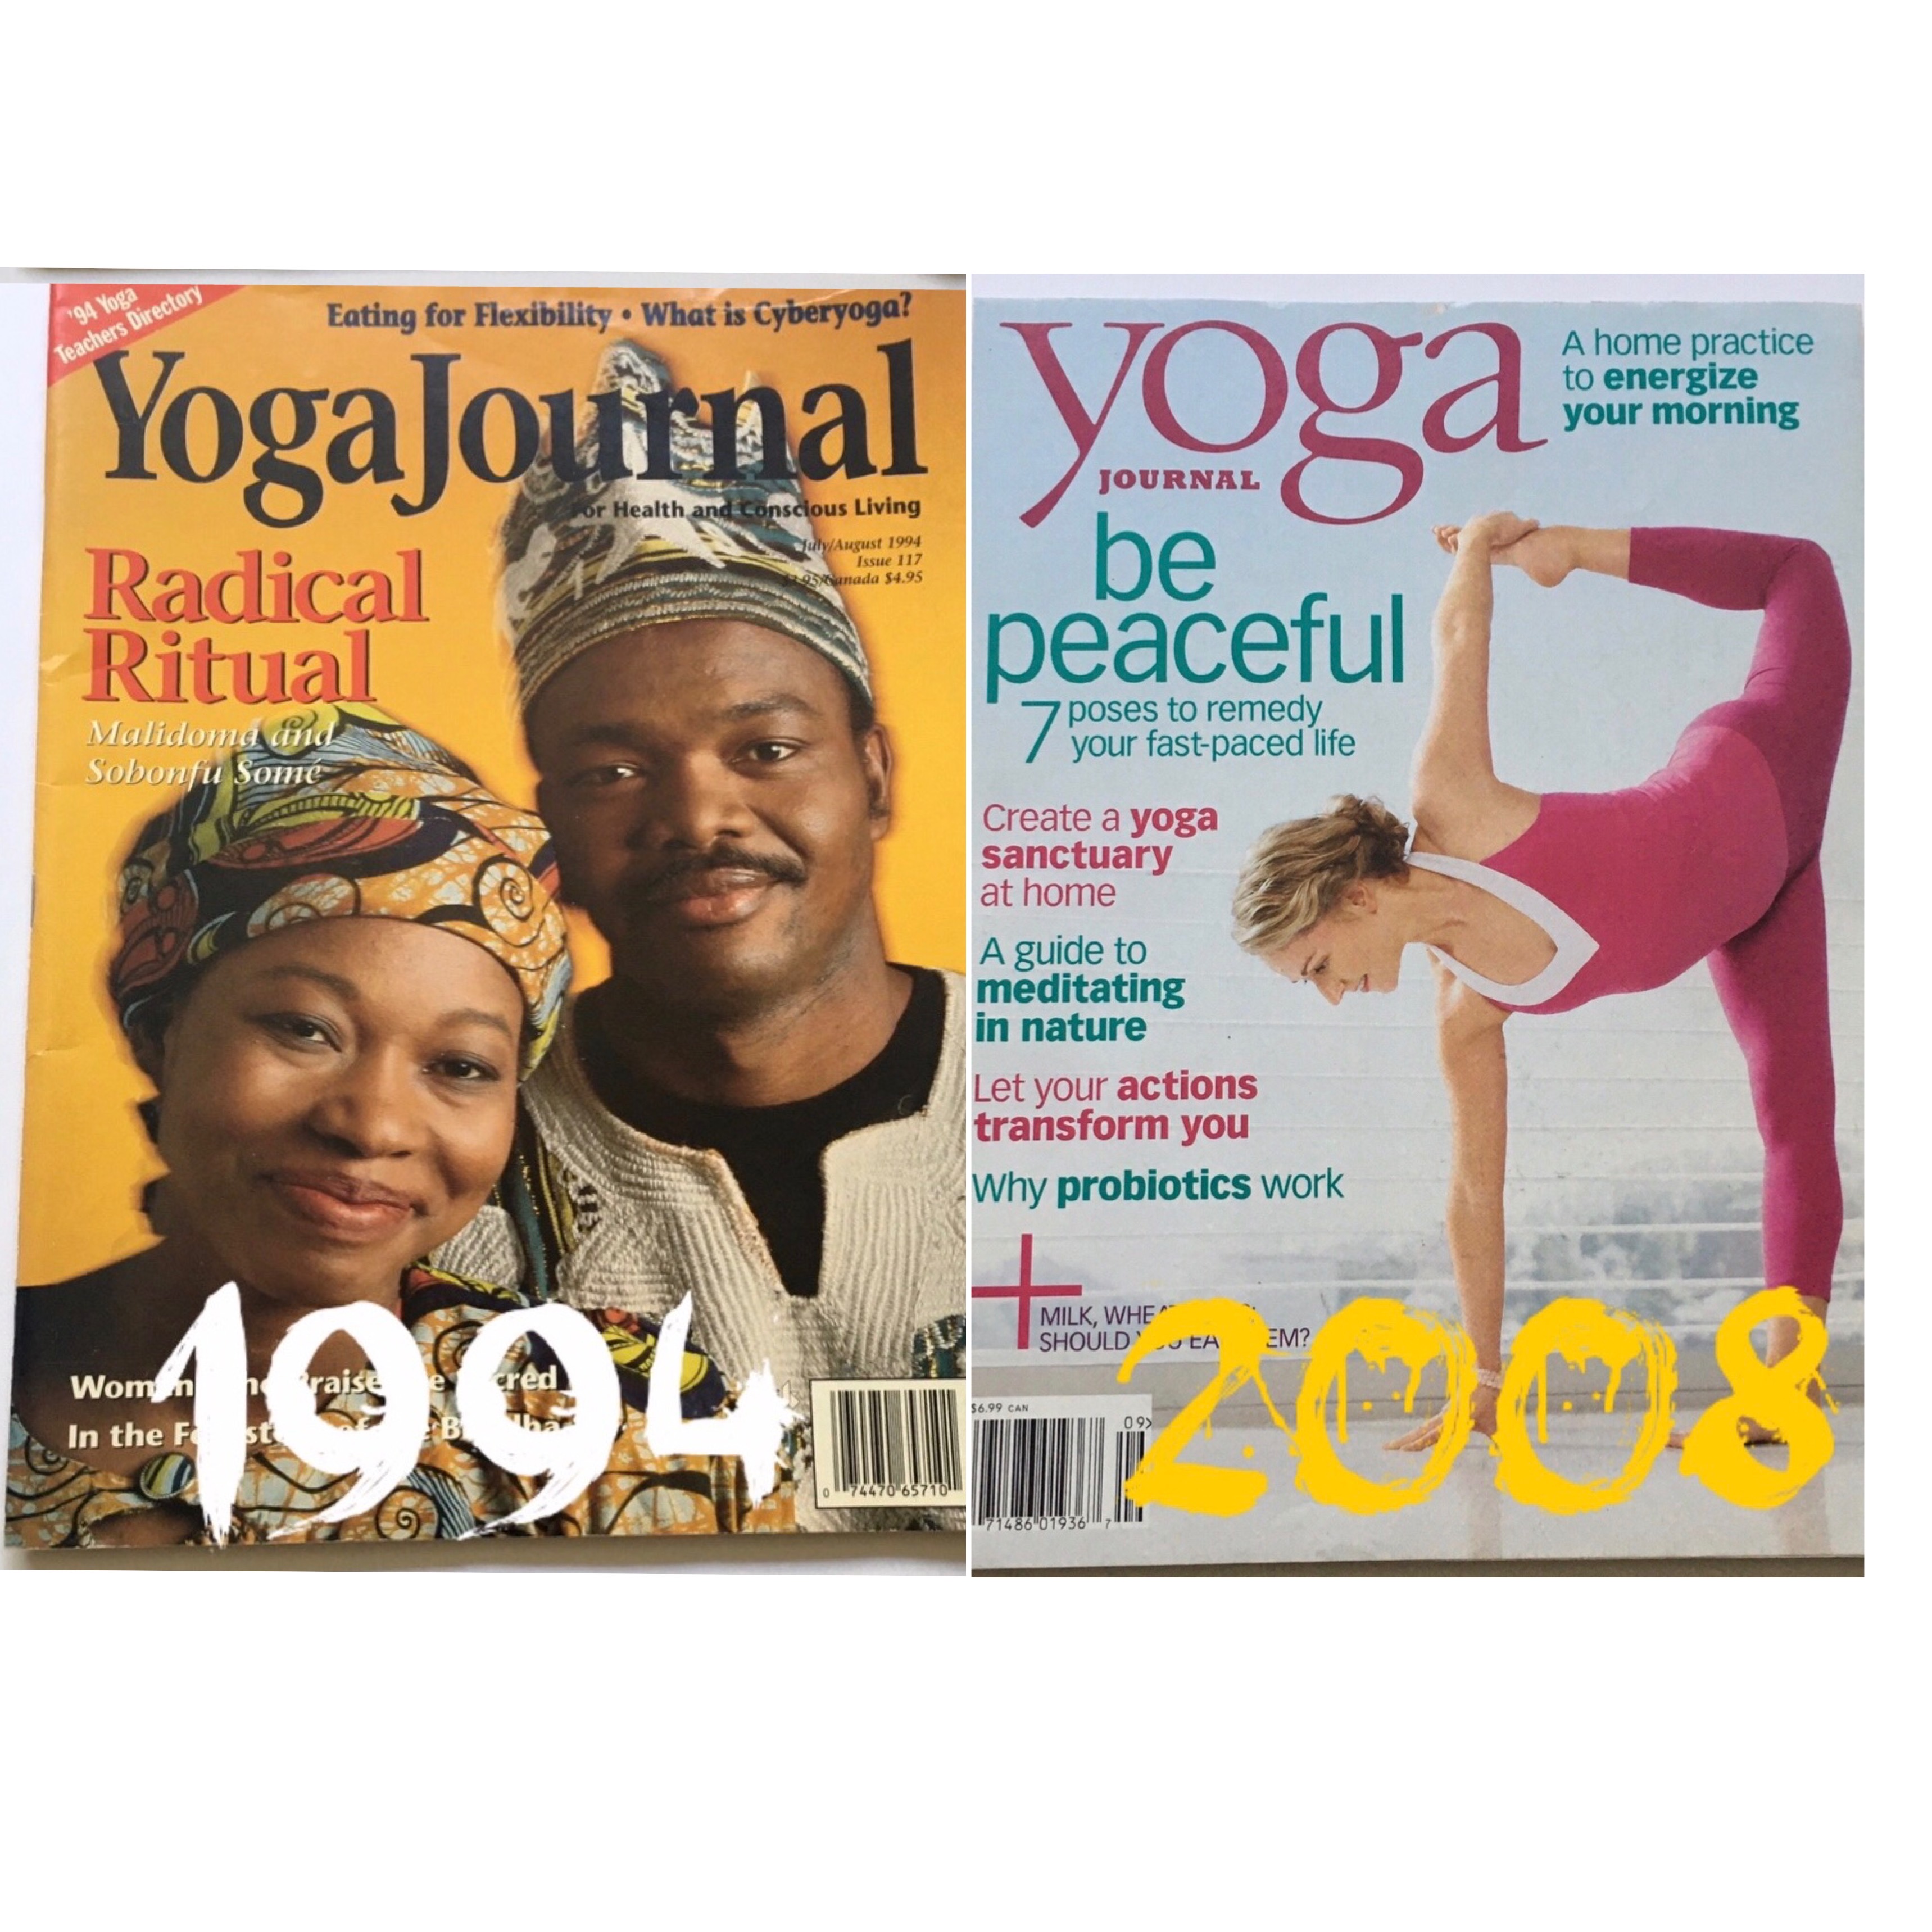 Marsha was featured in Yoga Journal -